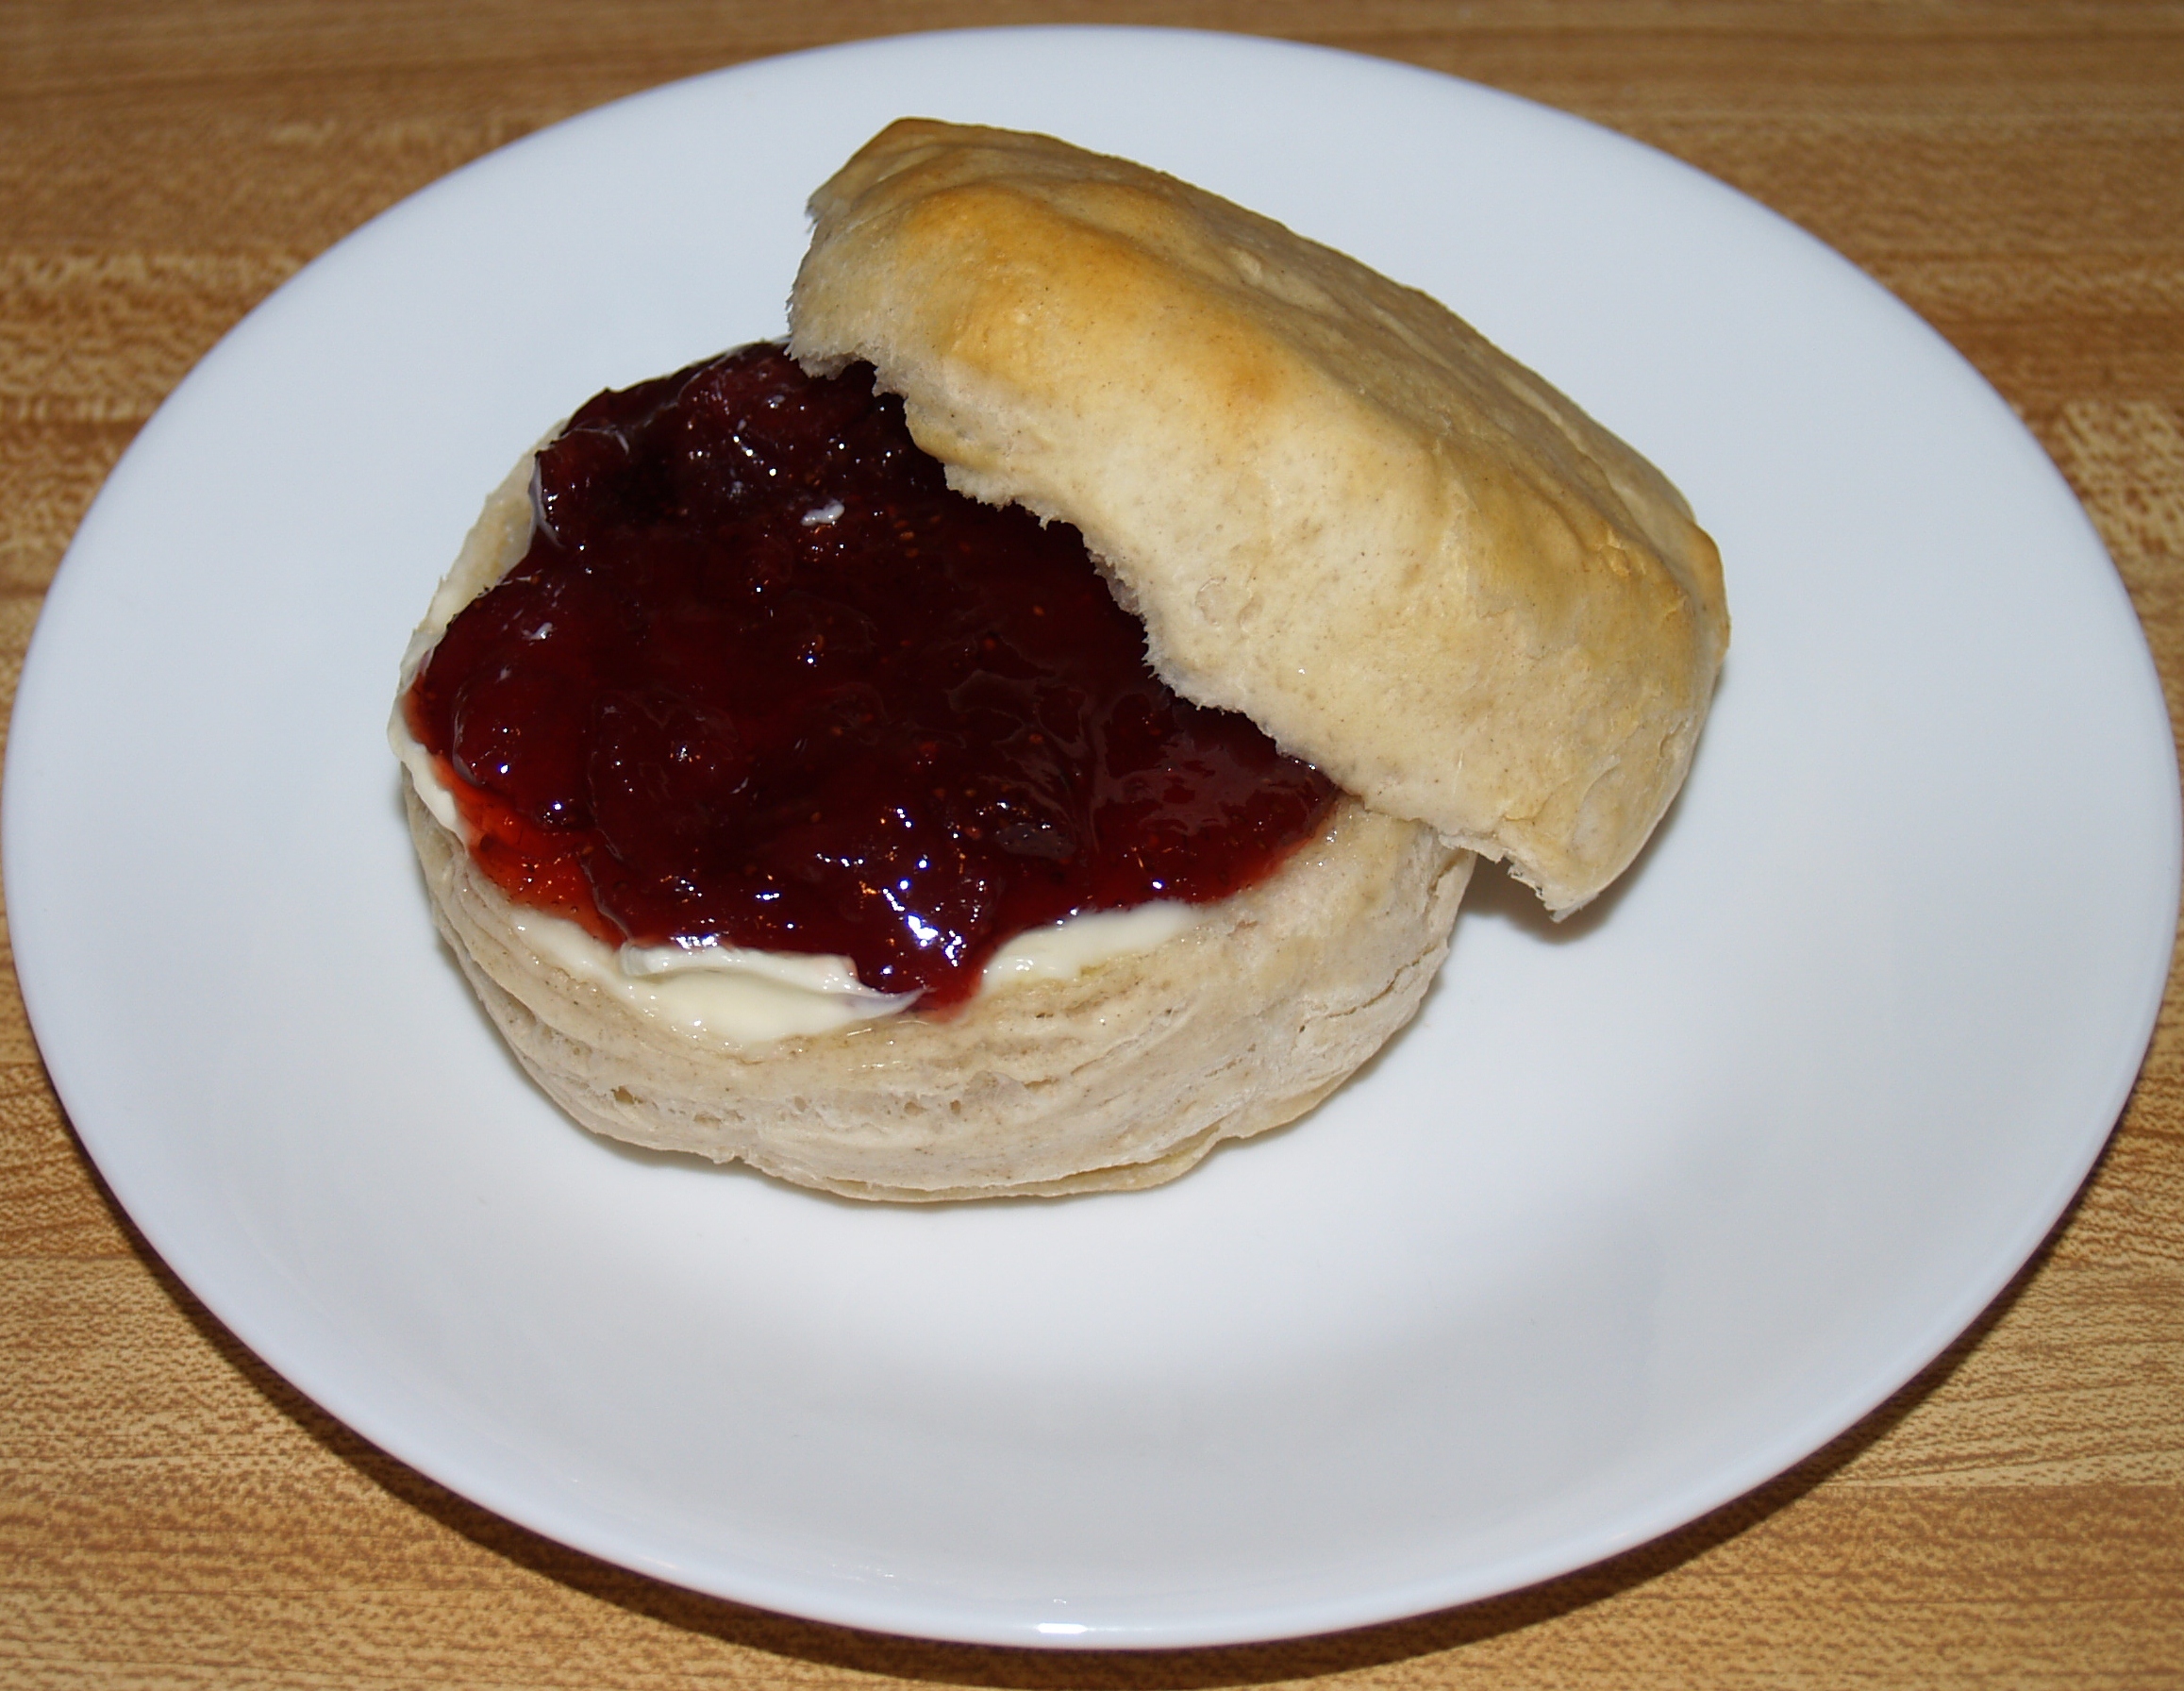 Strawberry Jam and 7 UP Biscuits